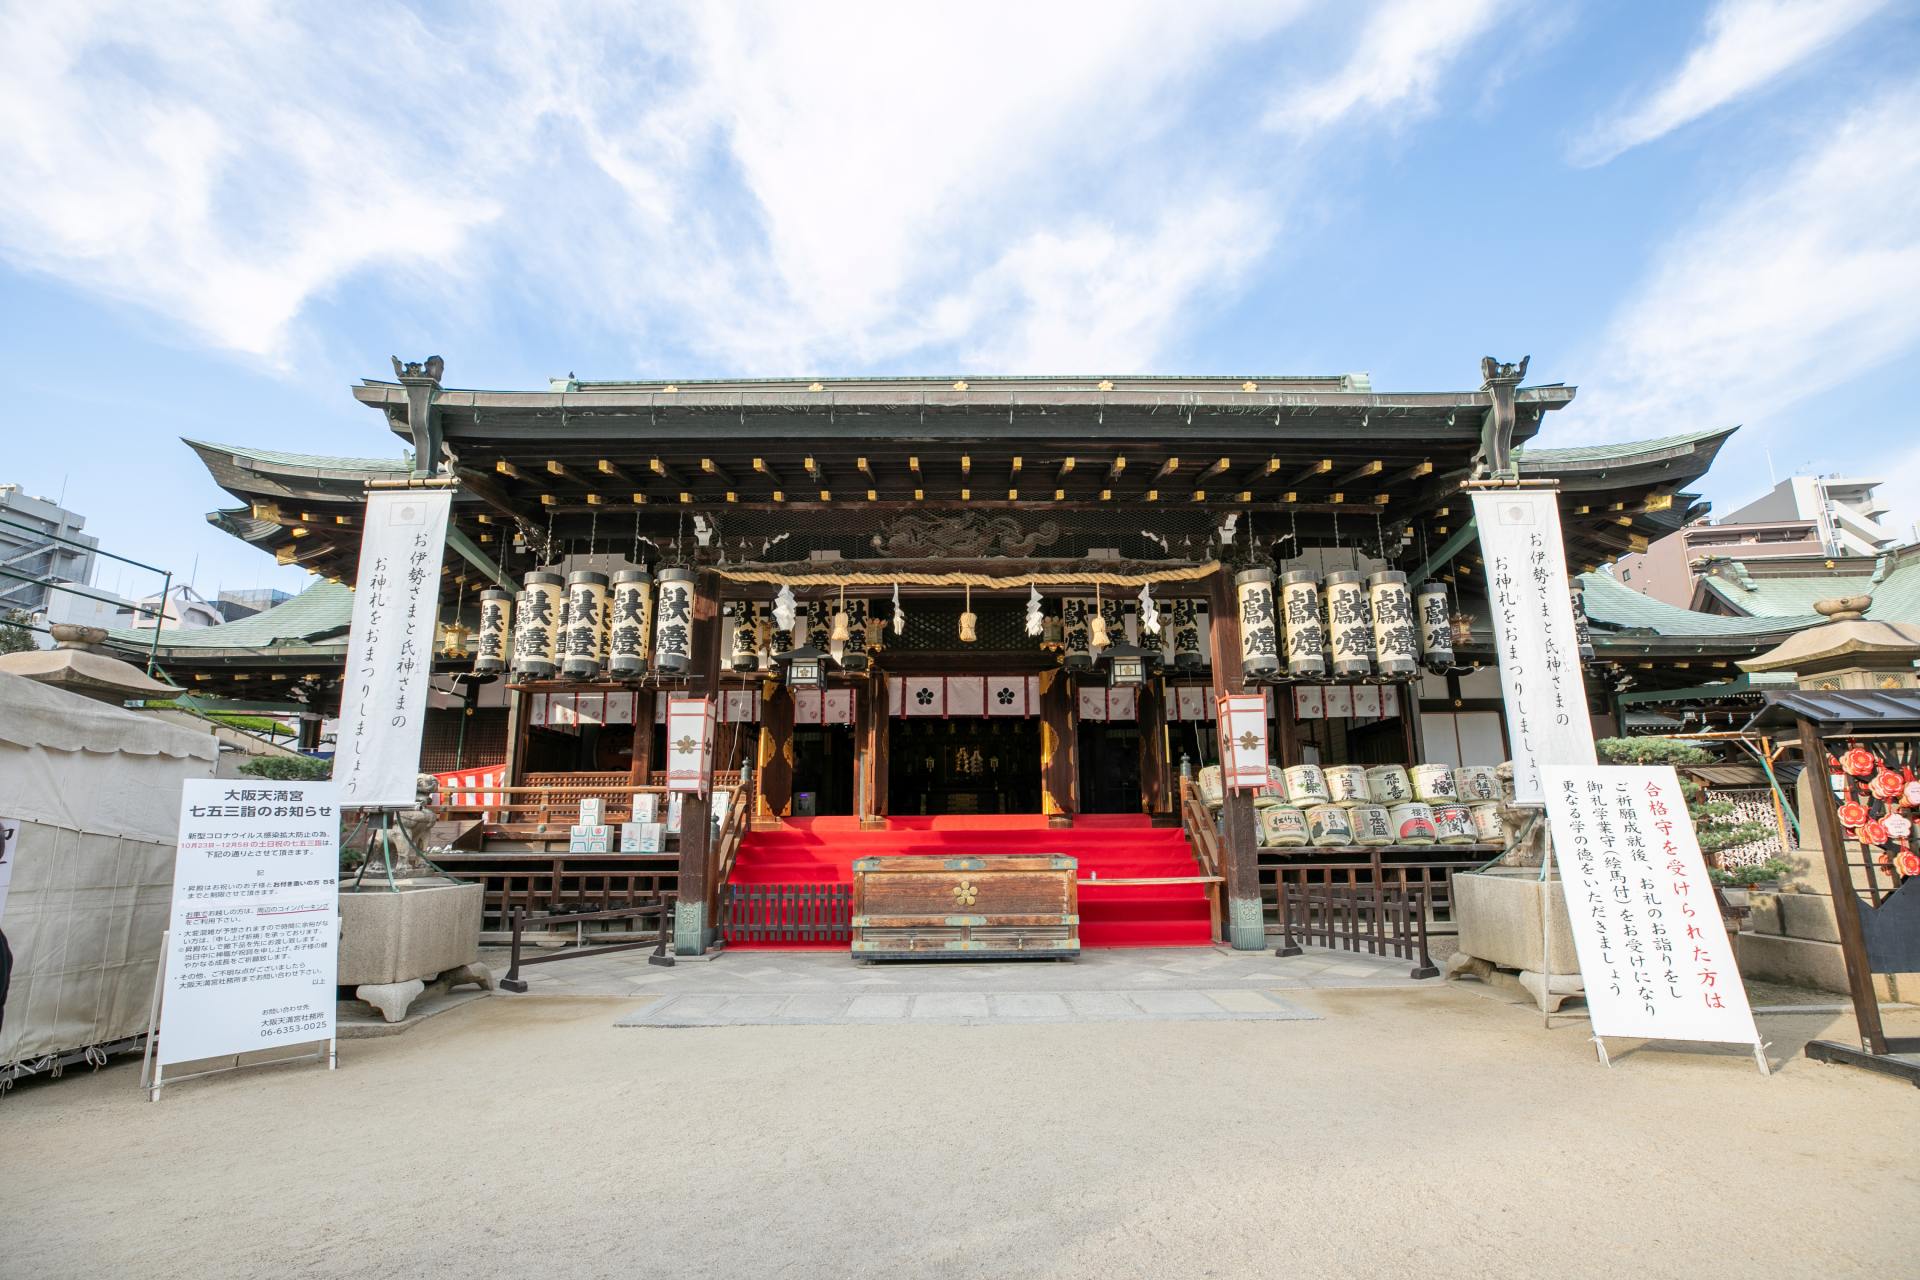 The main building of Osaka Temmangu Shrine is one of the largest wooden buildings in Osaka Prefecture.